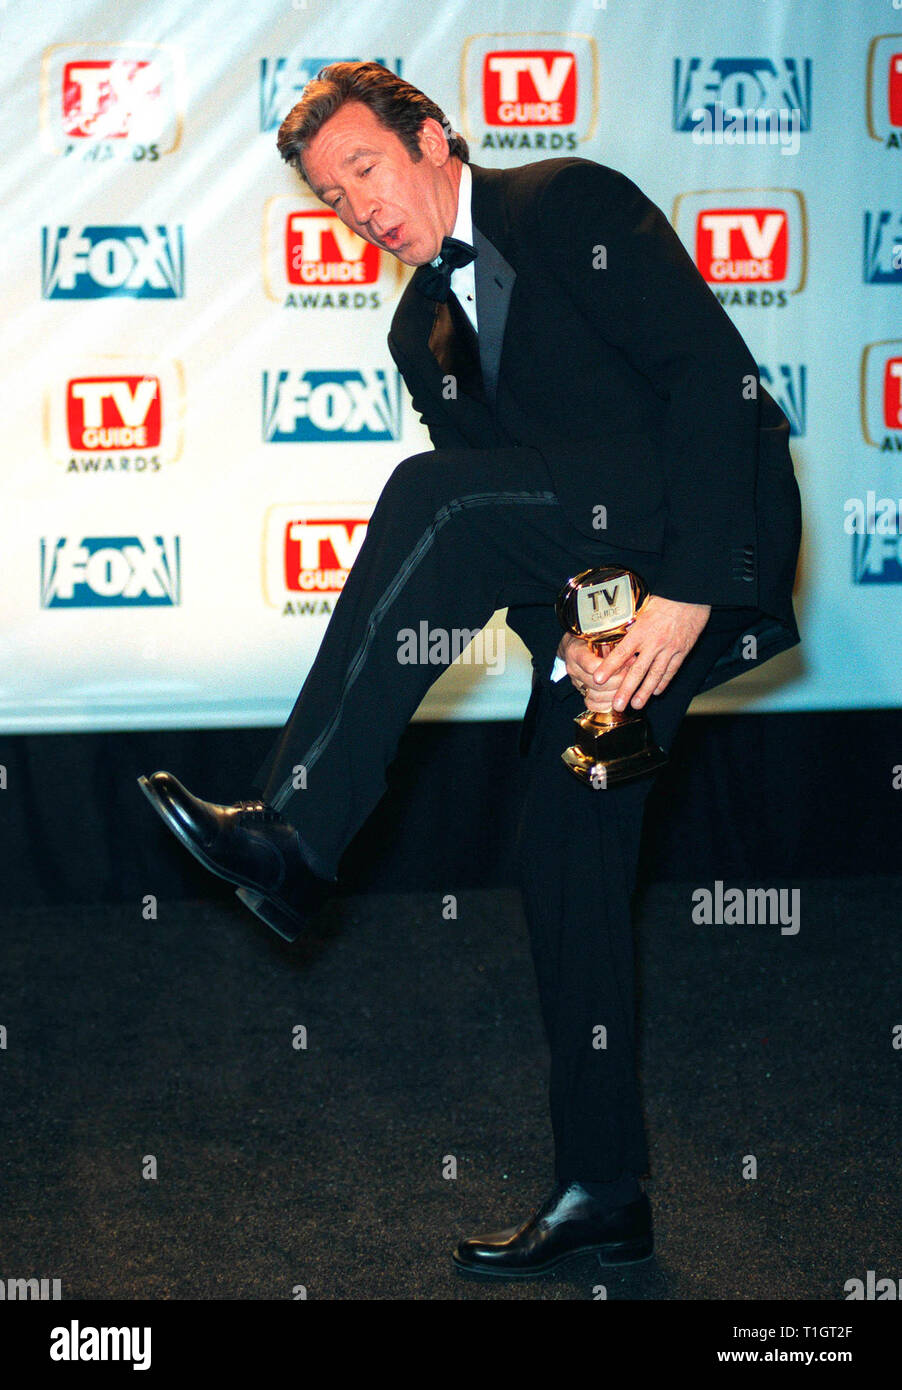 LOS ANGELES, CA - February 1, 1999:  'Home Improvement' star TIM ALLEN at the 1st Annual TV Guide Awards in Los Angeles. He won for Favorite Actor in a Comedy. © Paul Smith / Featureflash Stock Photo